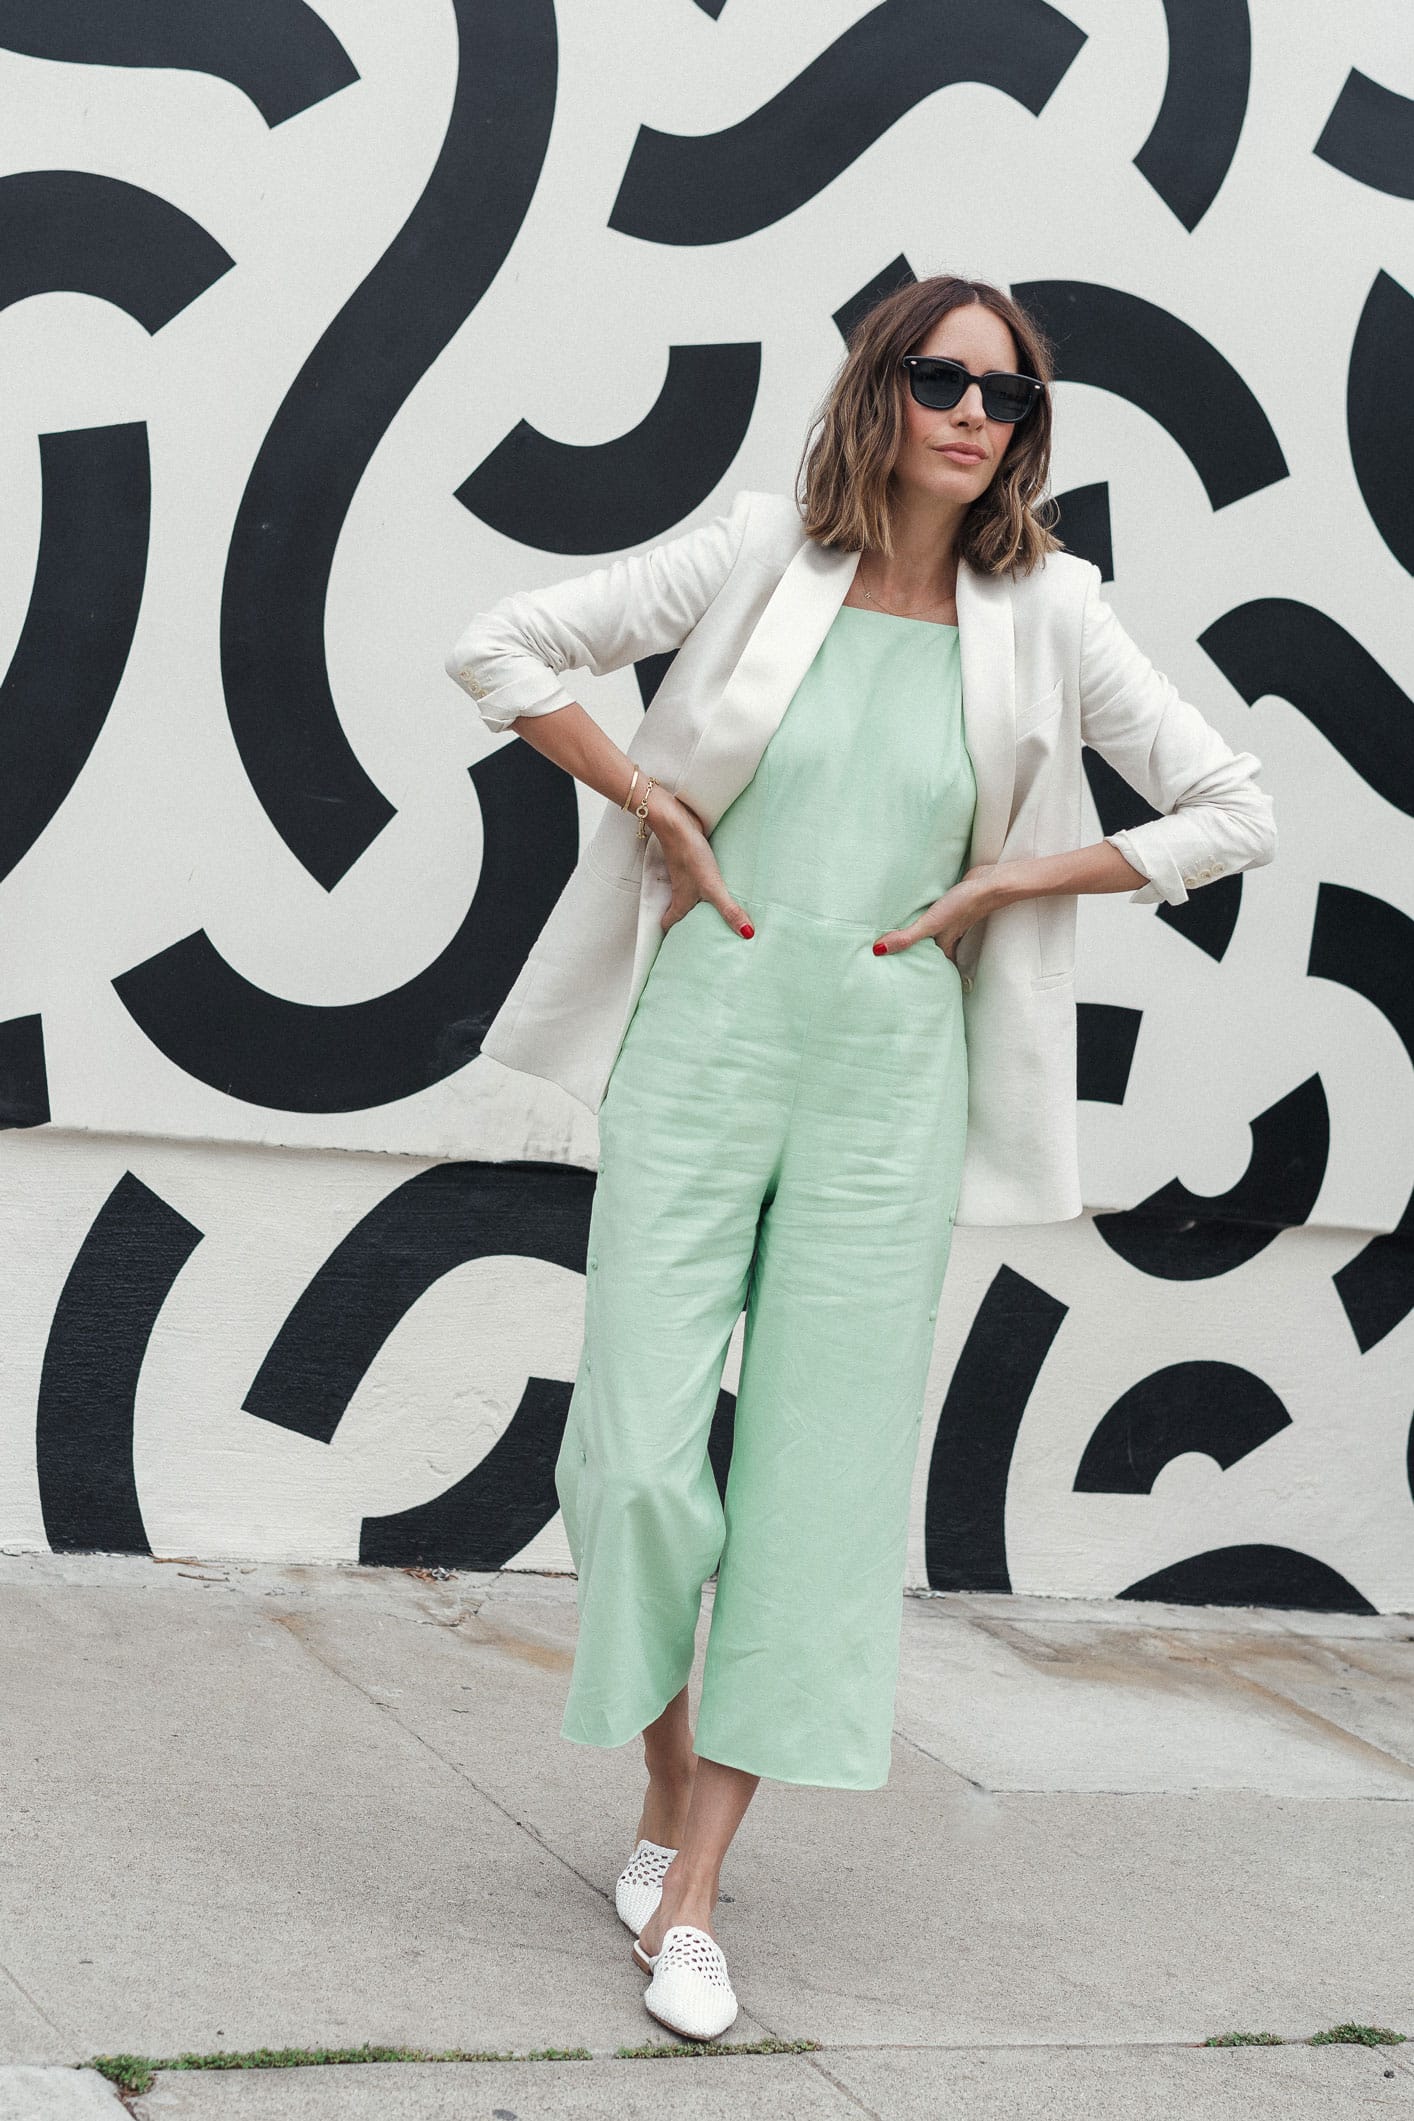 Louise Roe of Front Roe models her top Summer jumpsuit